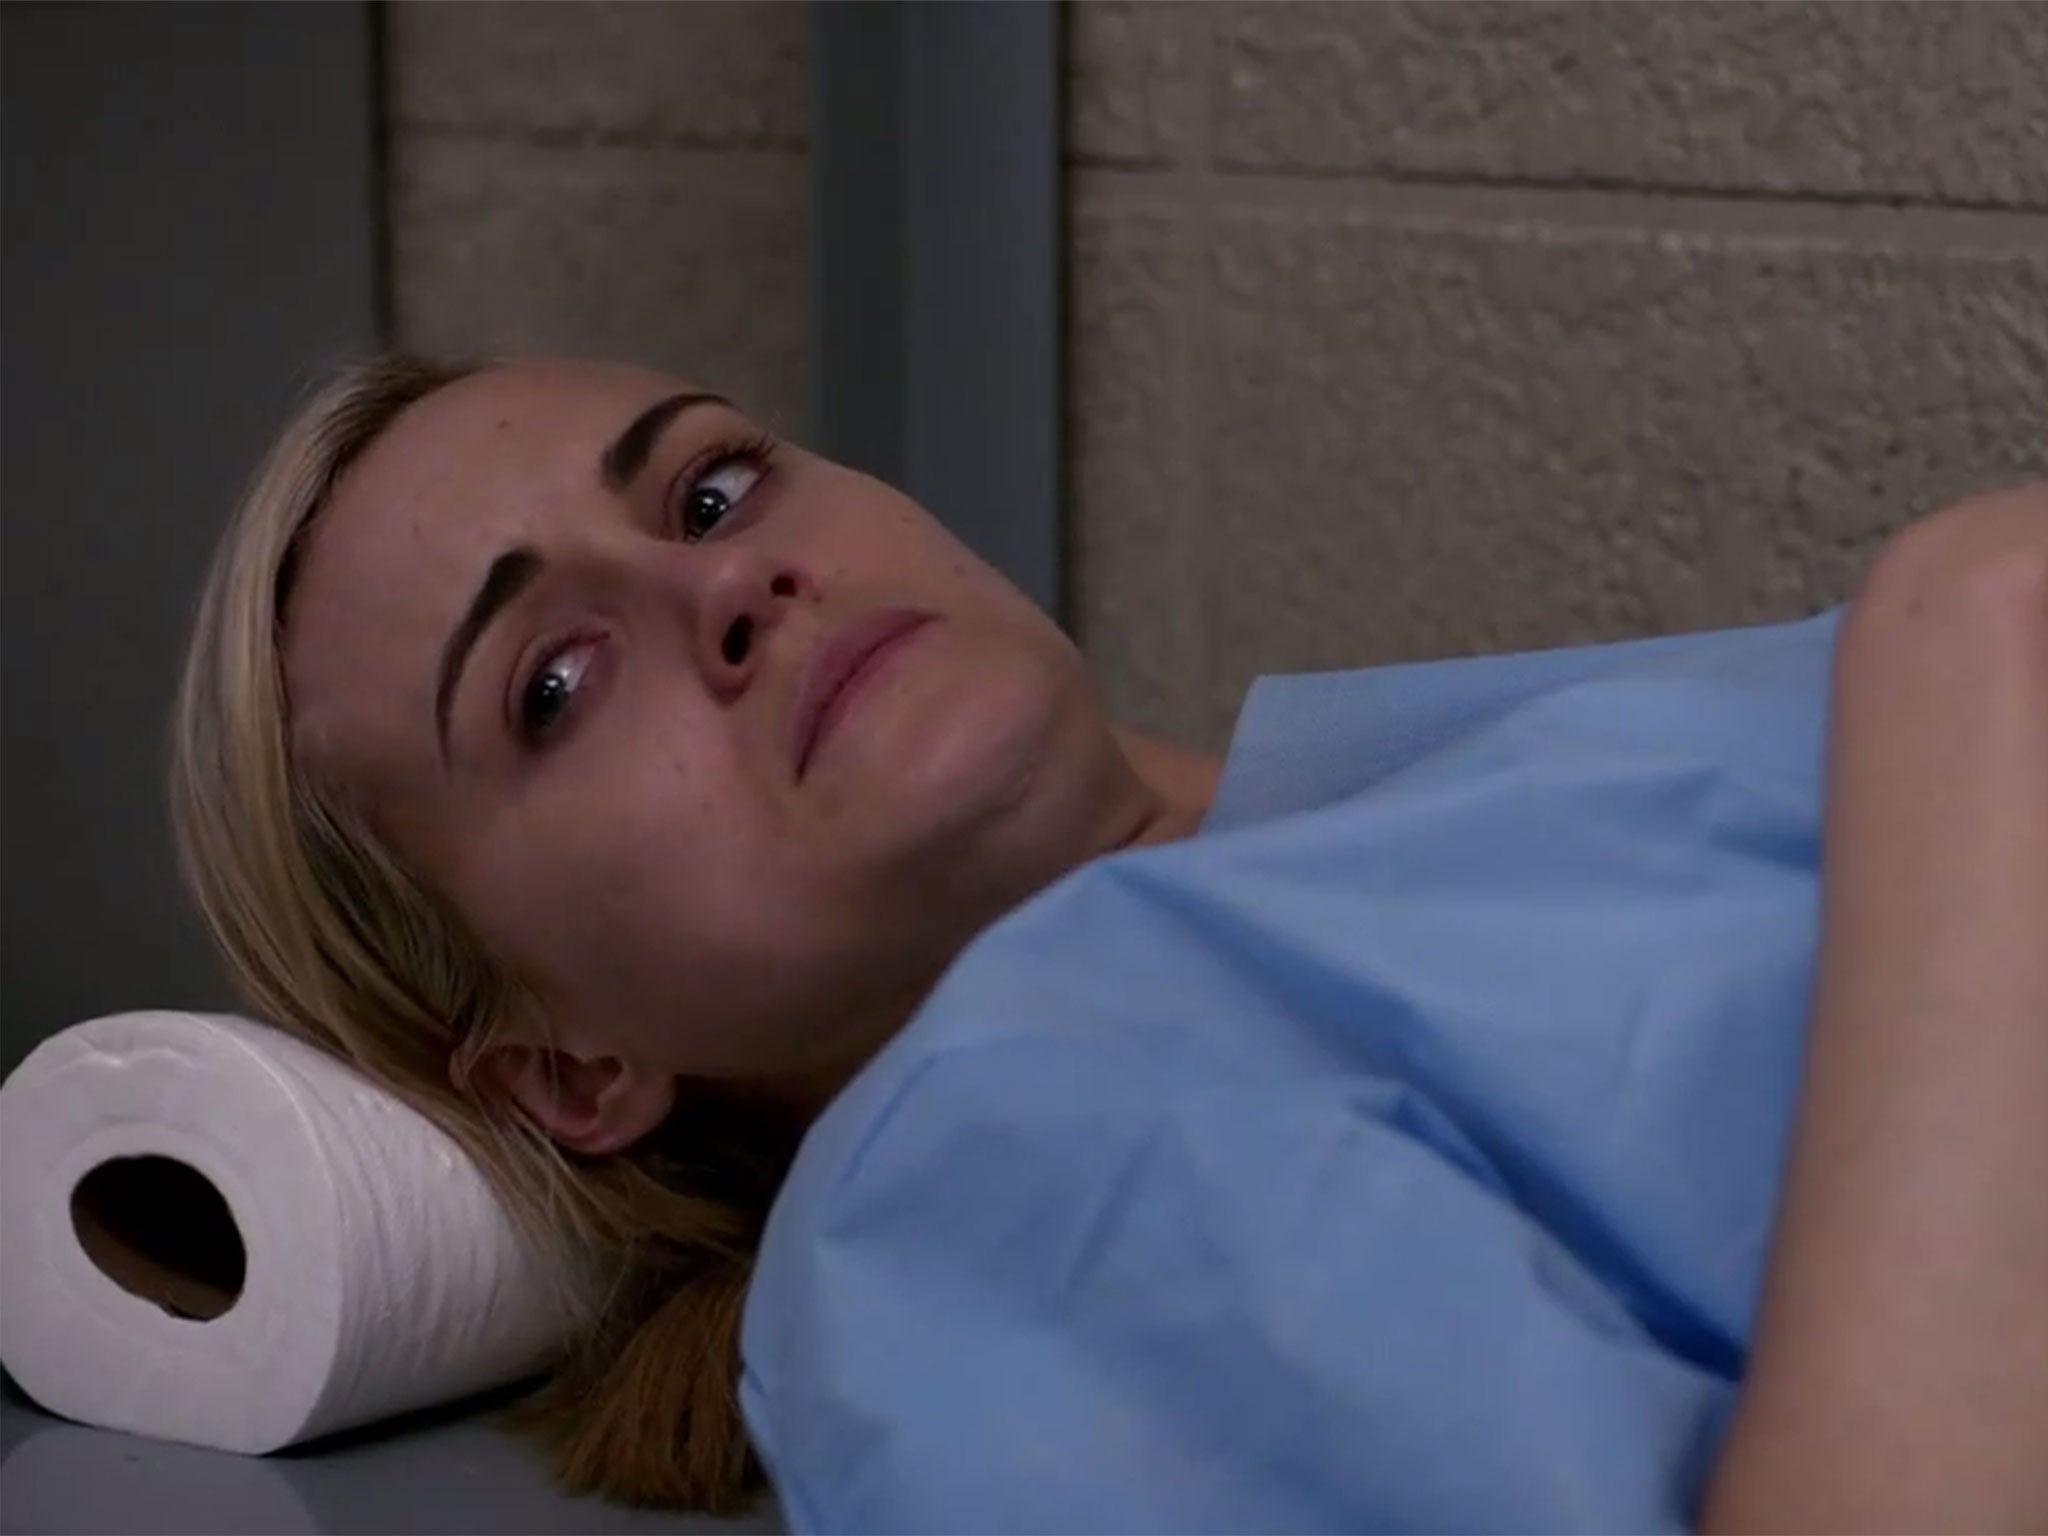 Piper in the new trailer for Orange is the New Black.